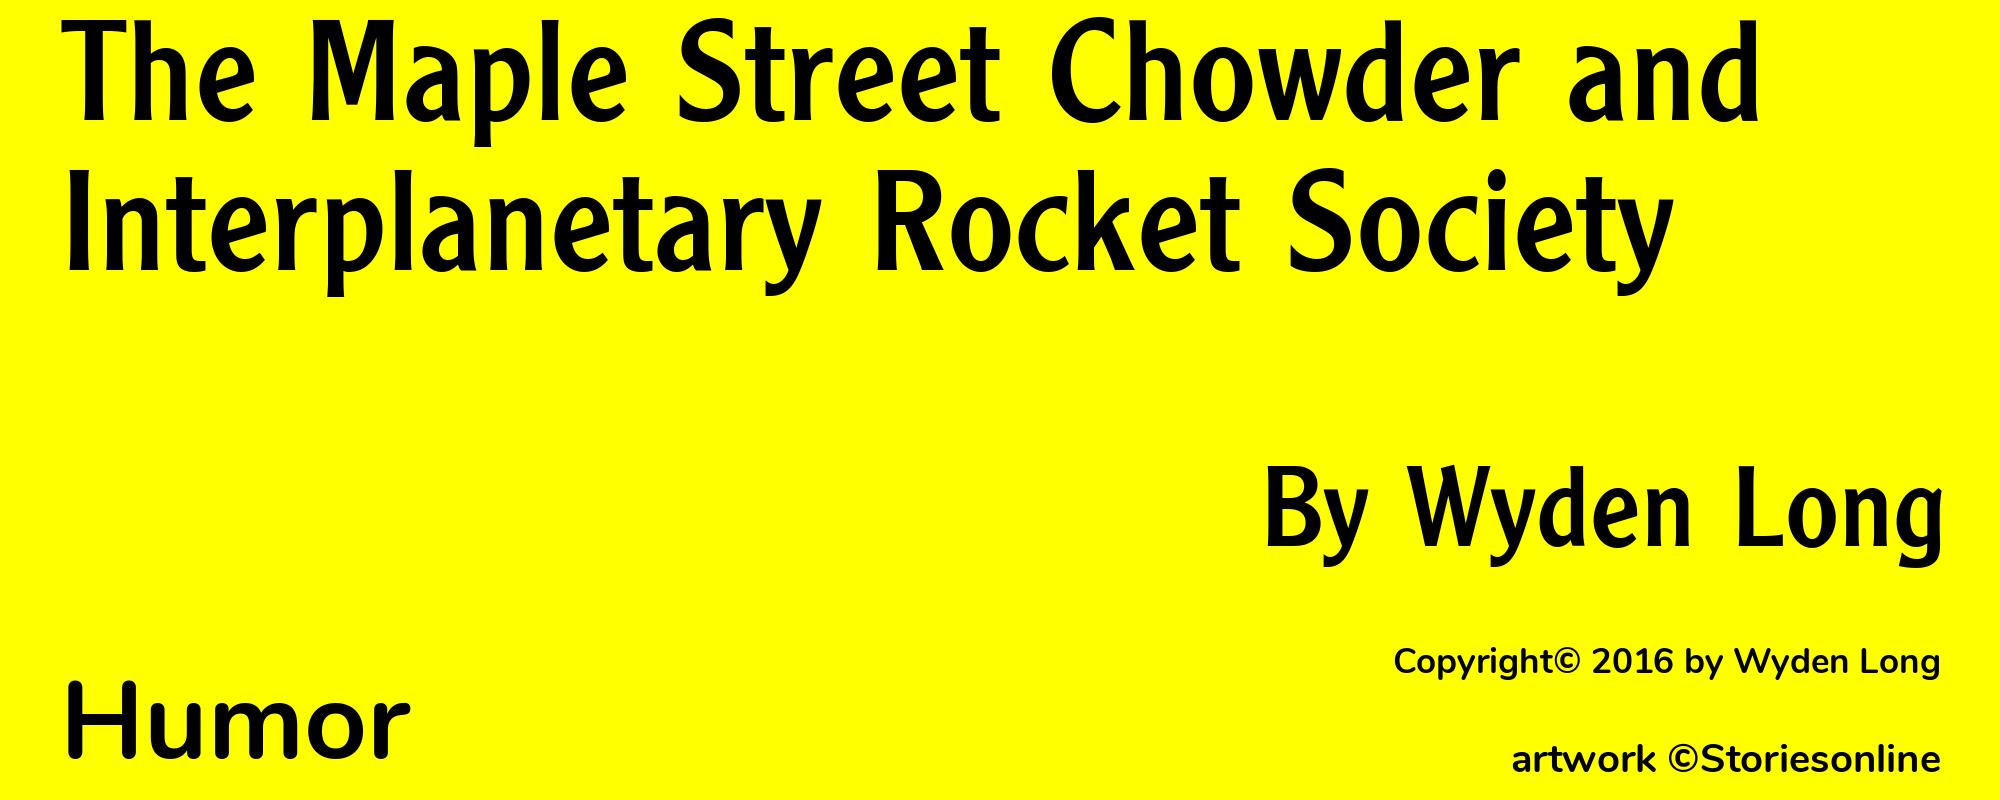 The Maple Street Chowder and Interplanetary Rocket Society - Cover